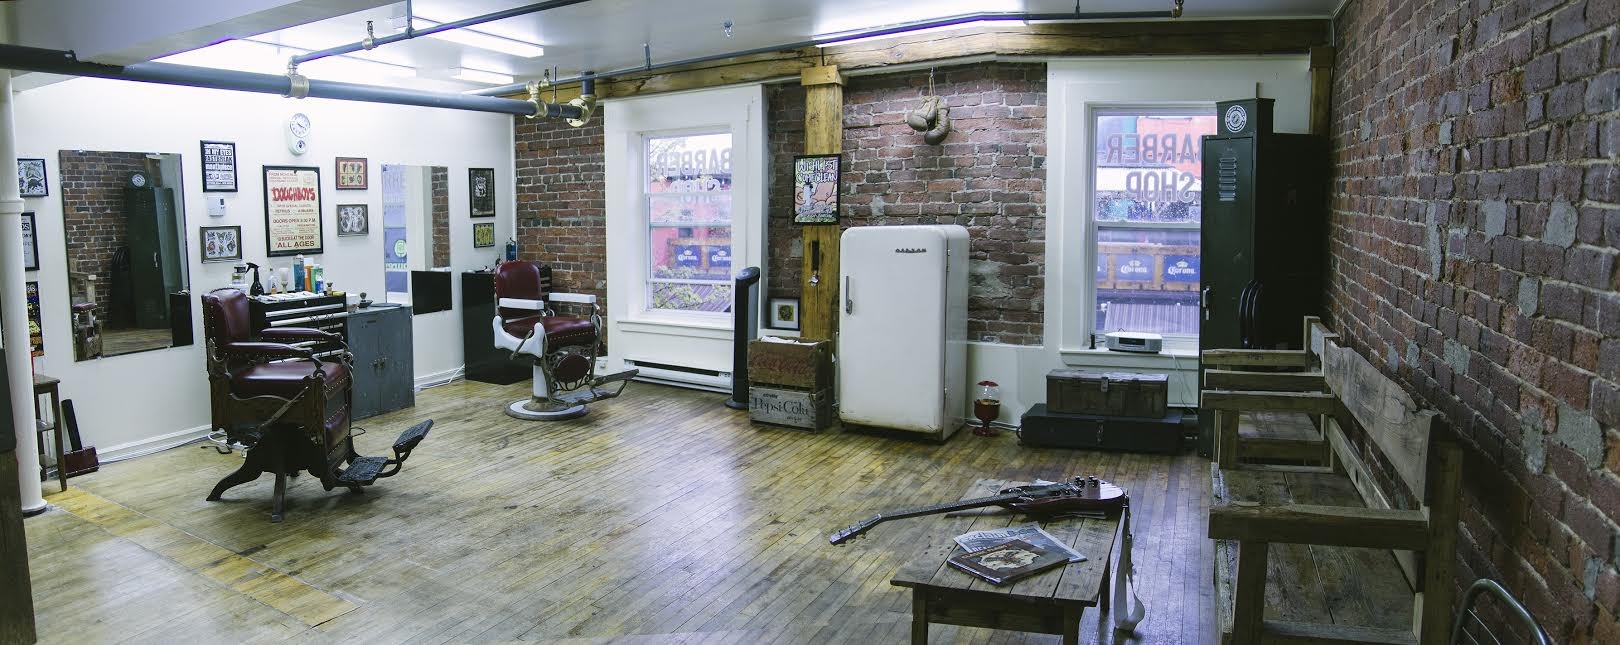 Noreaster Barber storms Argyle Street